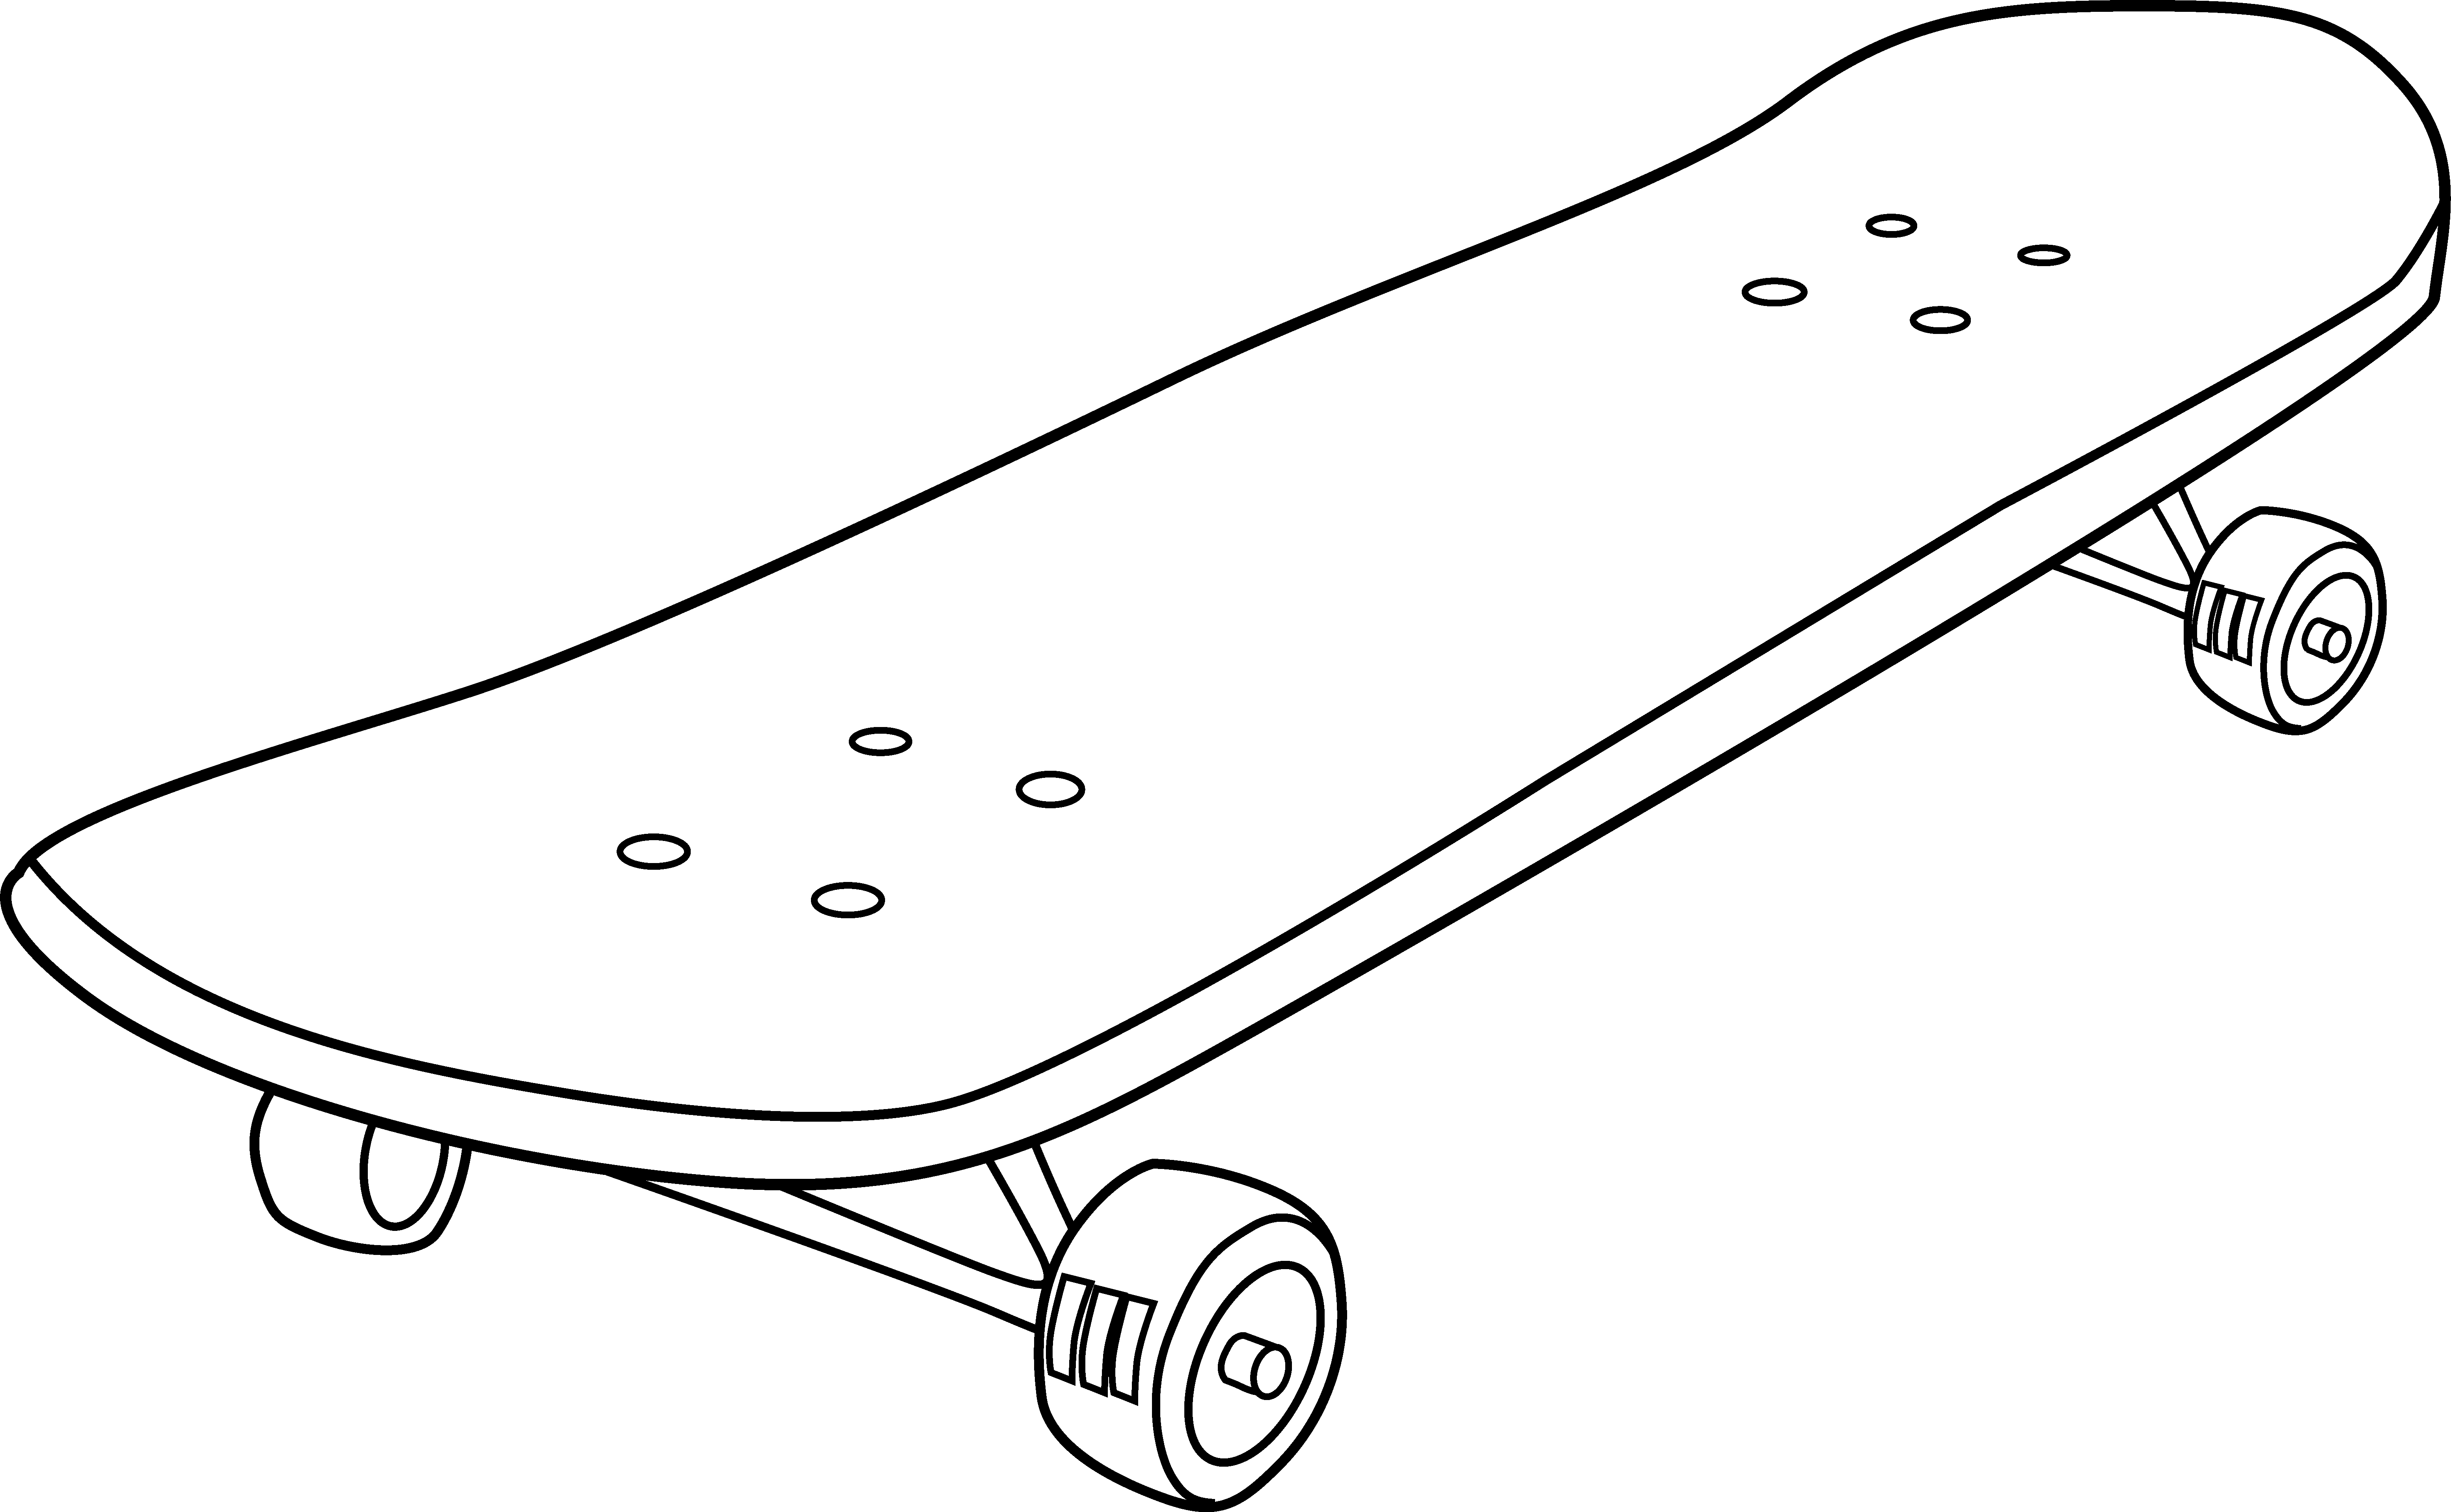 skateboard colouring page - Clip Art Library